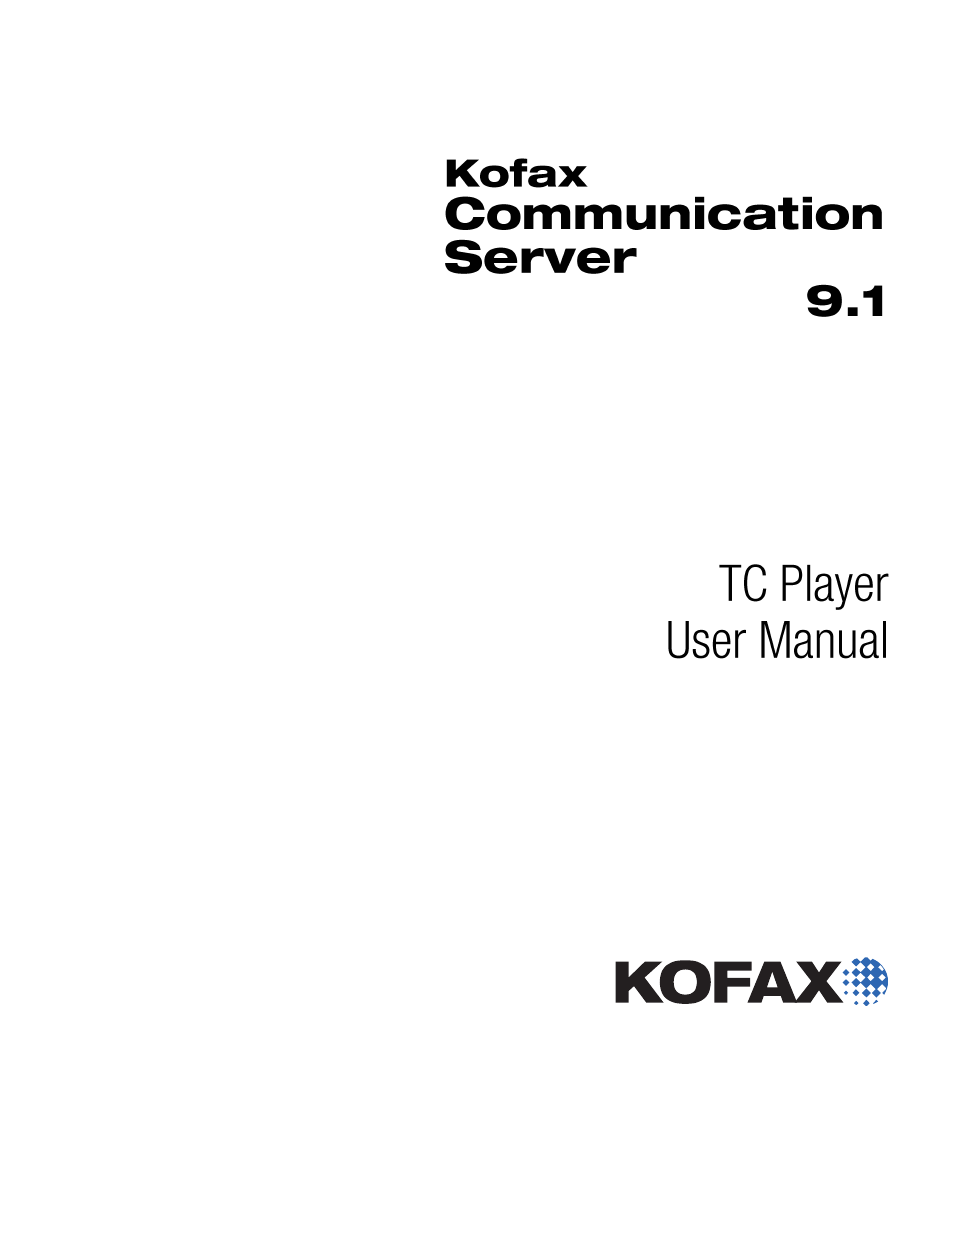 Kofax Communication Server 9.1 User Manual | 9 pages